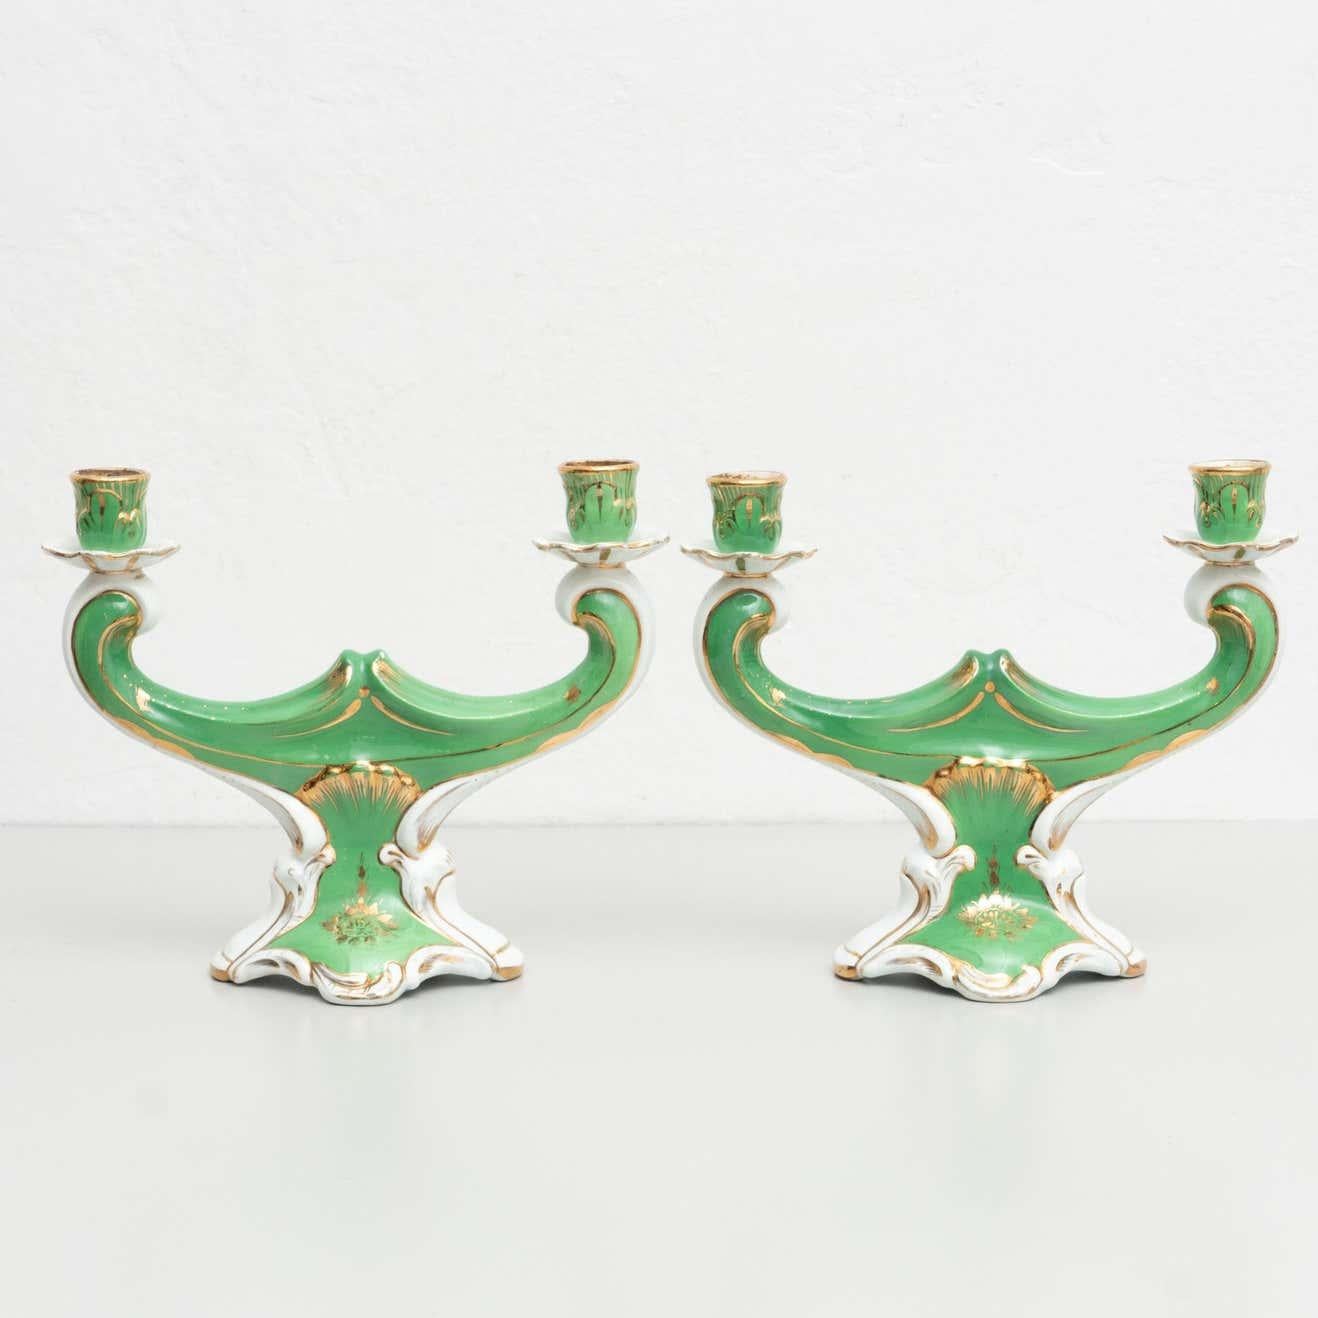 Hand-Painted Set of 2 Hand Painted Ceramic Candle Holders, circa 1930